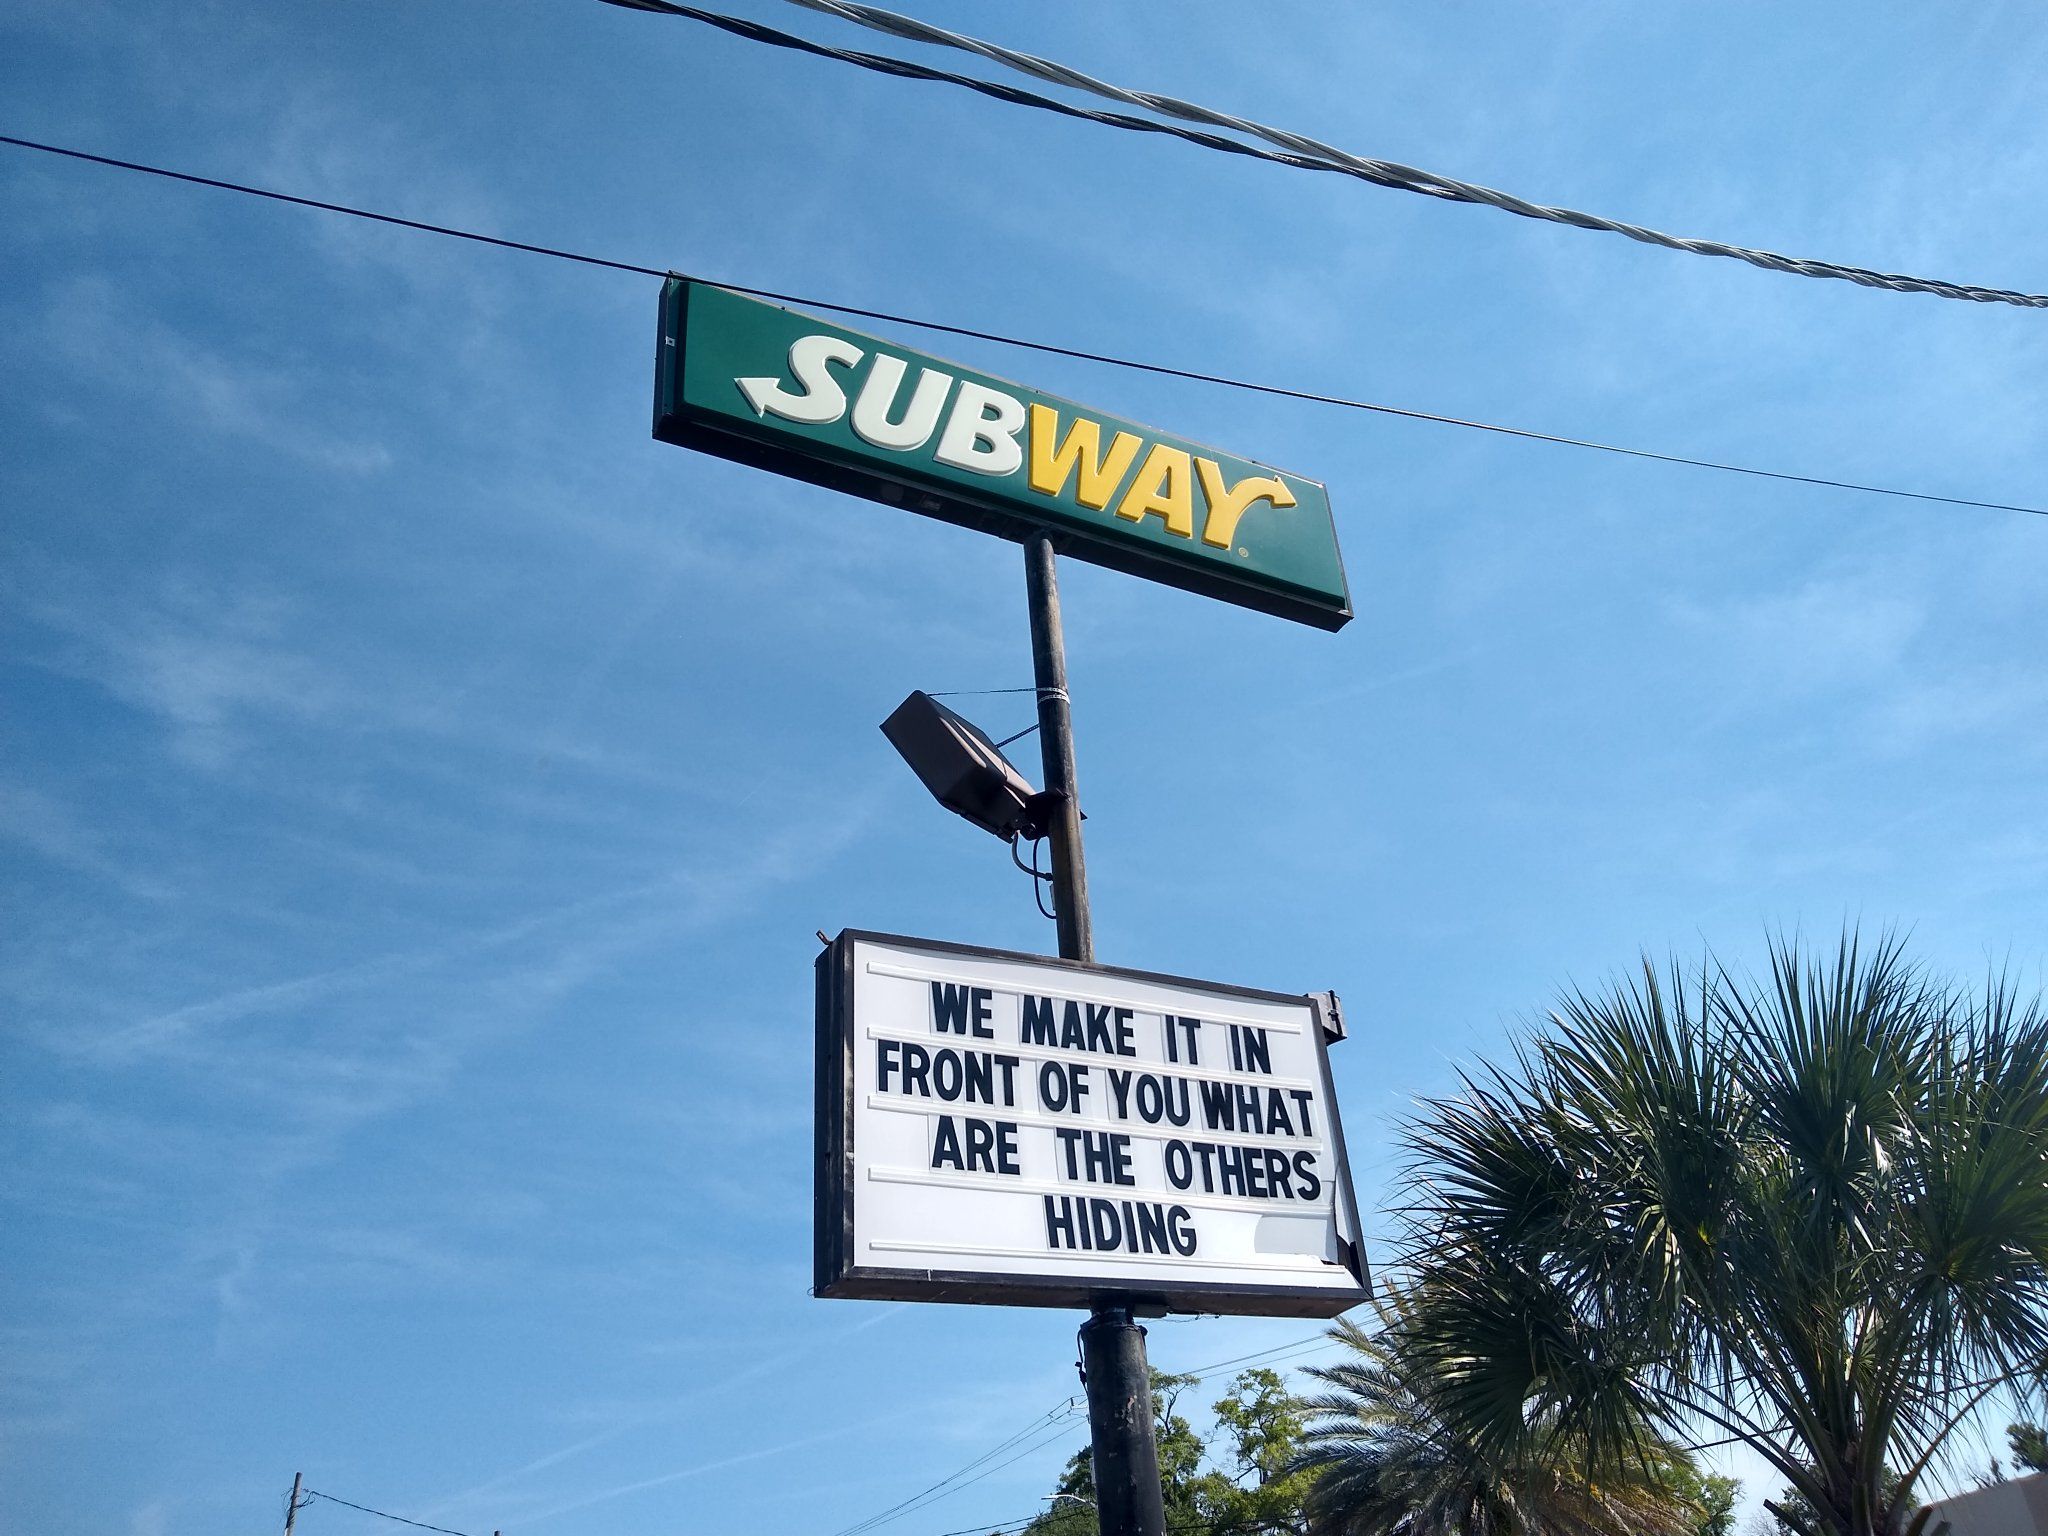 Damn Subway, put the bread knife down for a second.